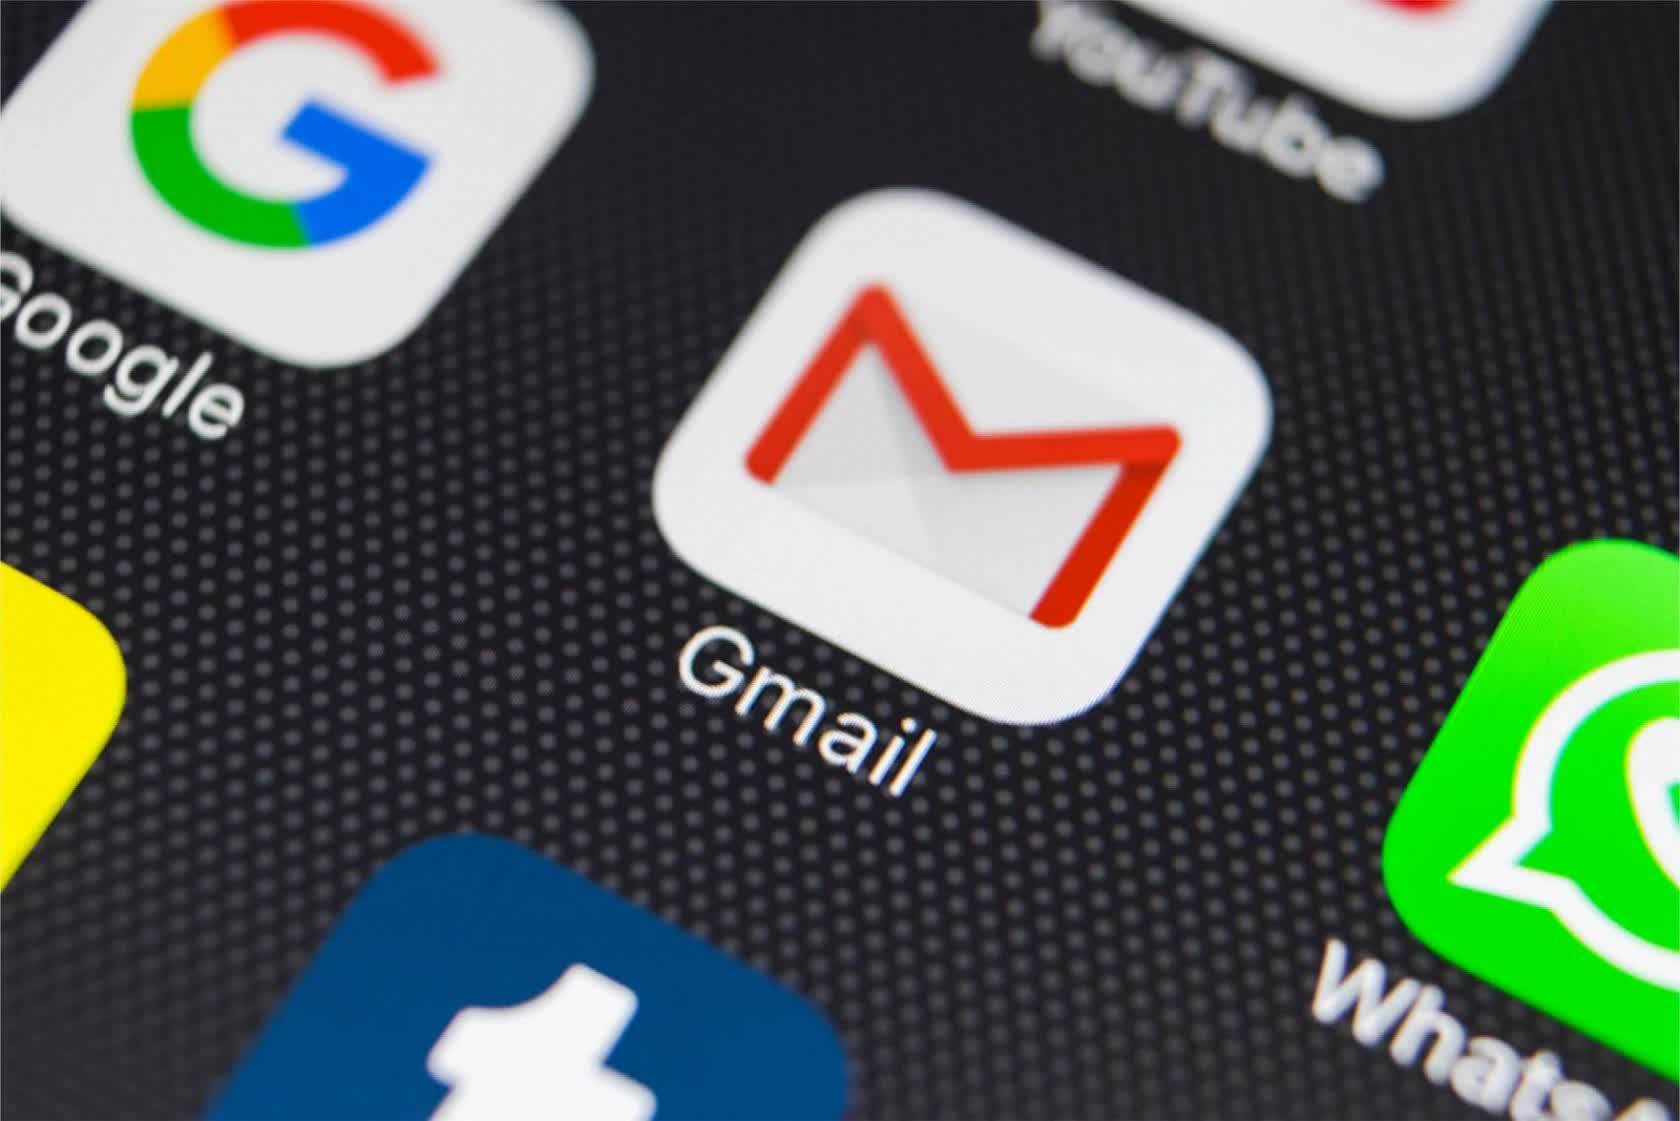 Here's how to disable Google Meet integration in Gmail's web and mobile apps